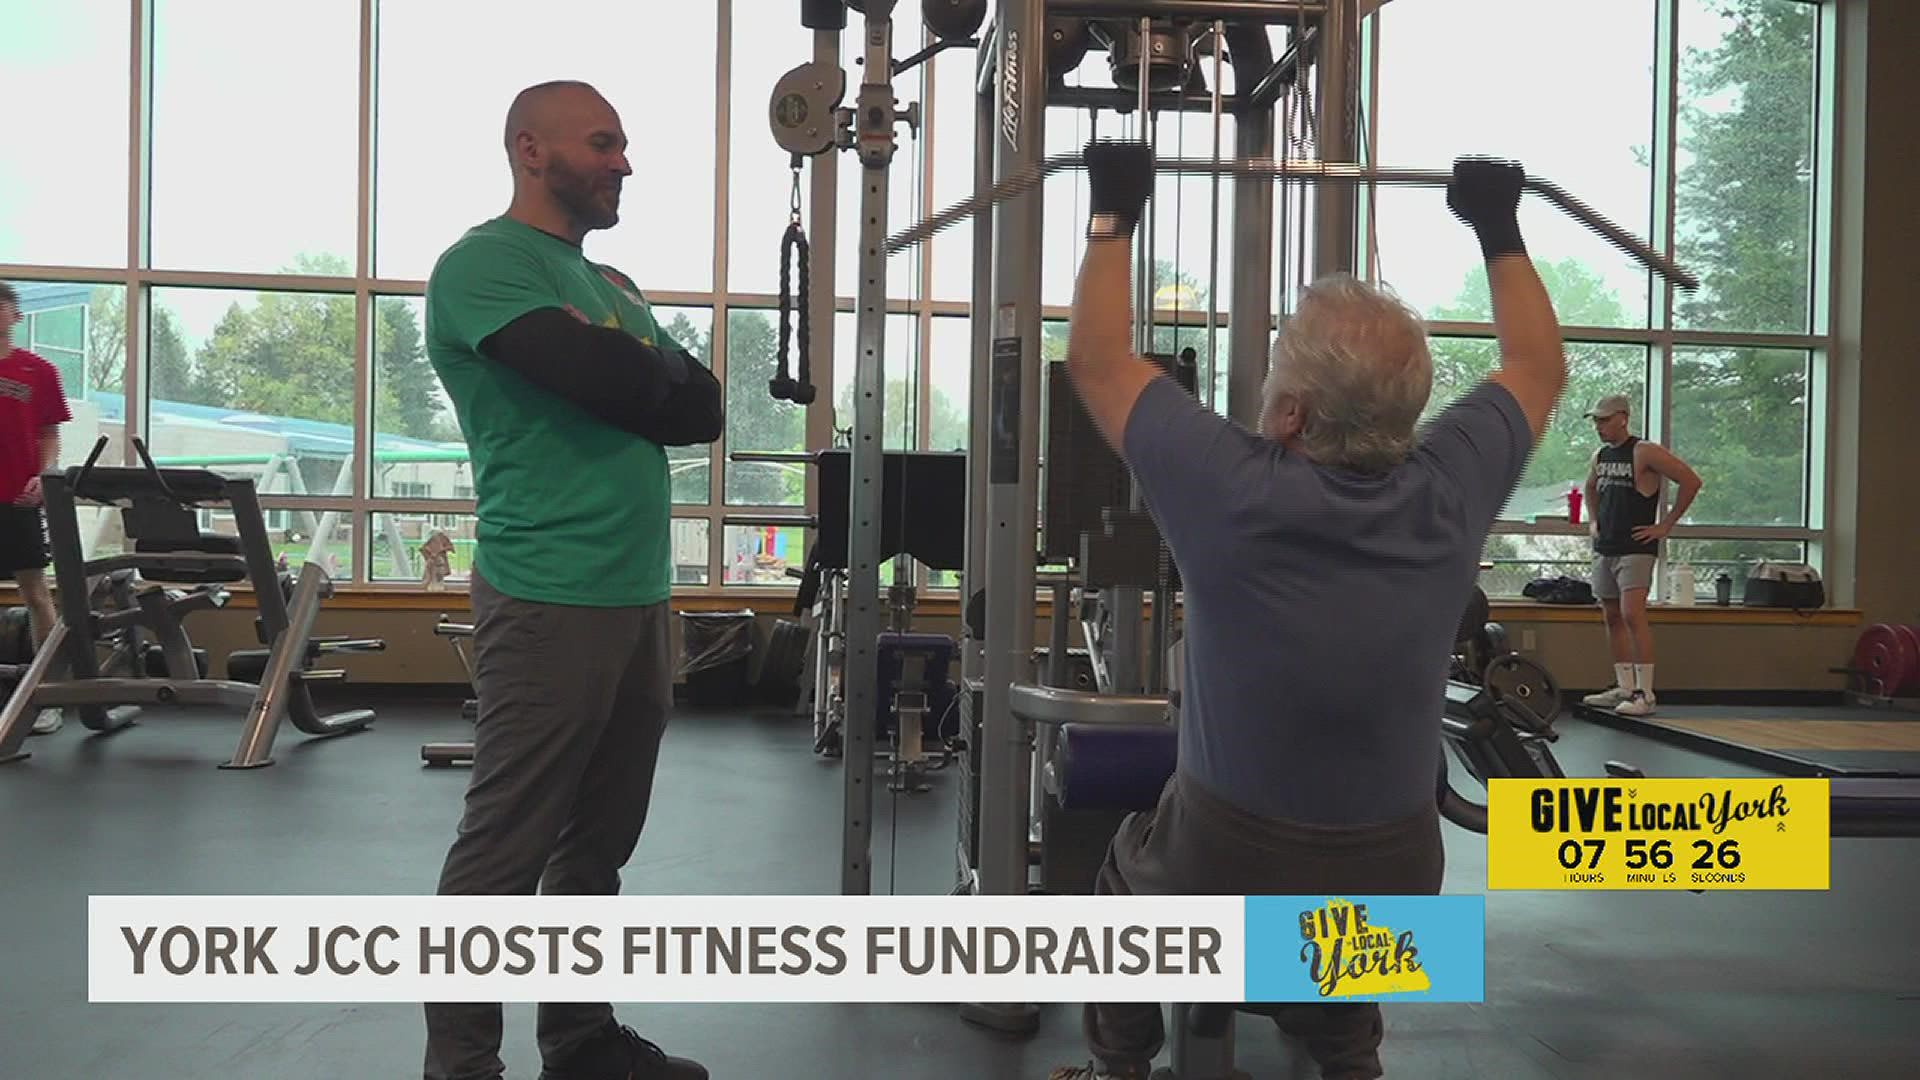 The class brought women together to both have fun, get a workout in, and raise money for an important group.